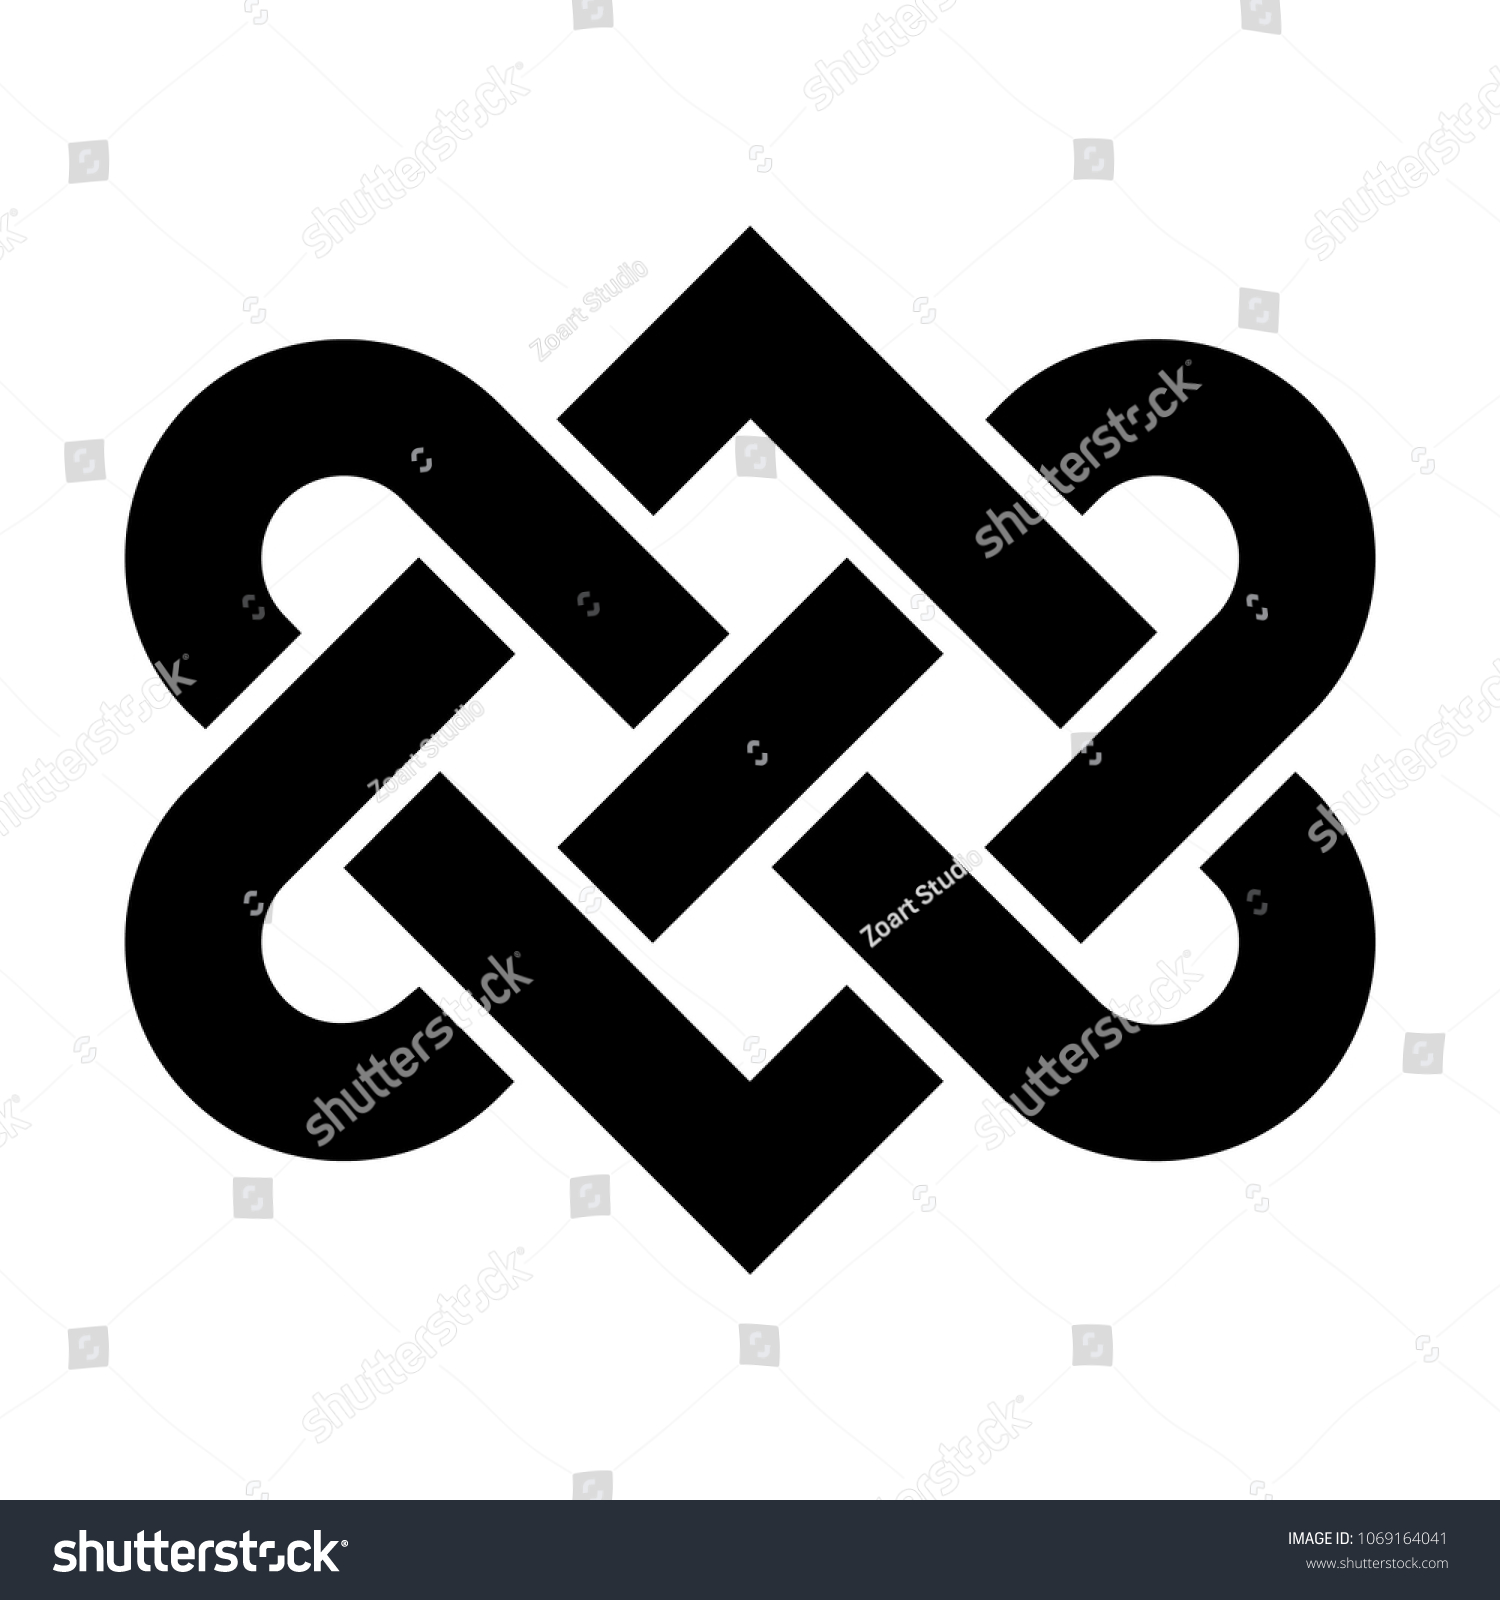 Download Celtic Love Knot Vector Stock Vector (Royalty Free ...